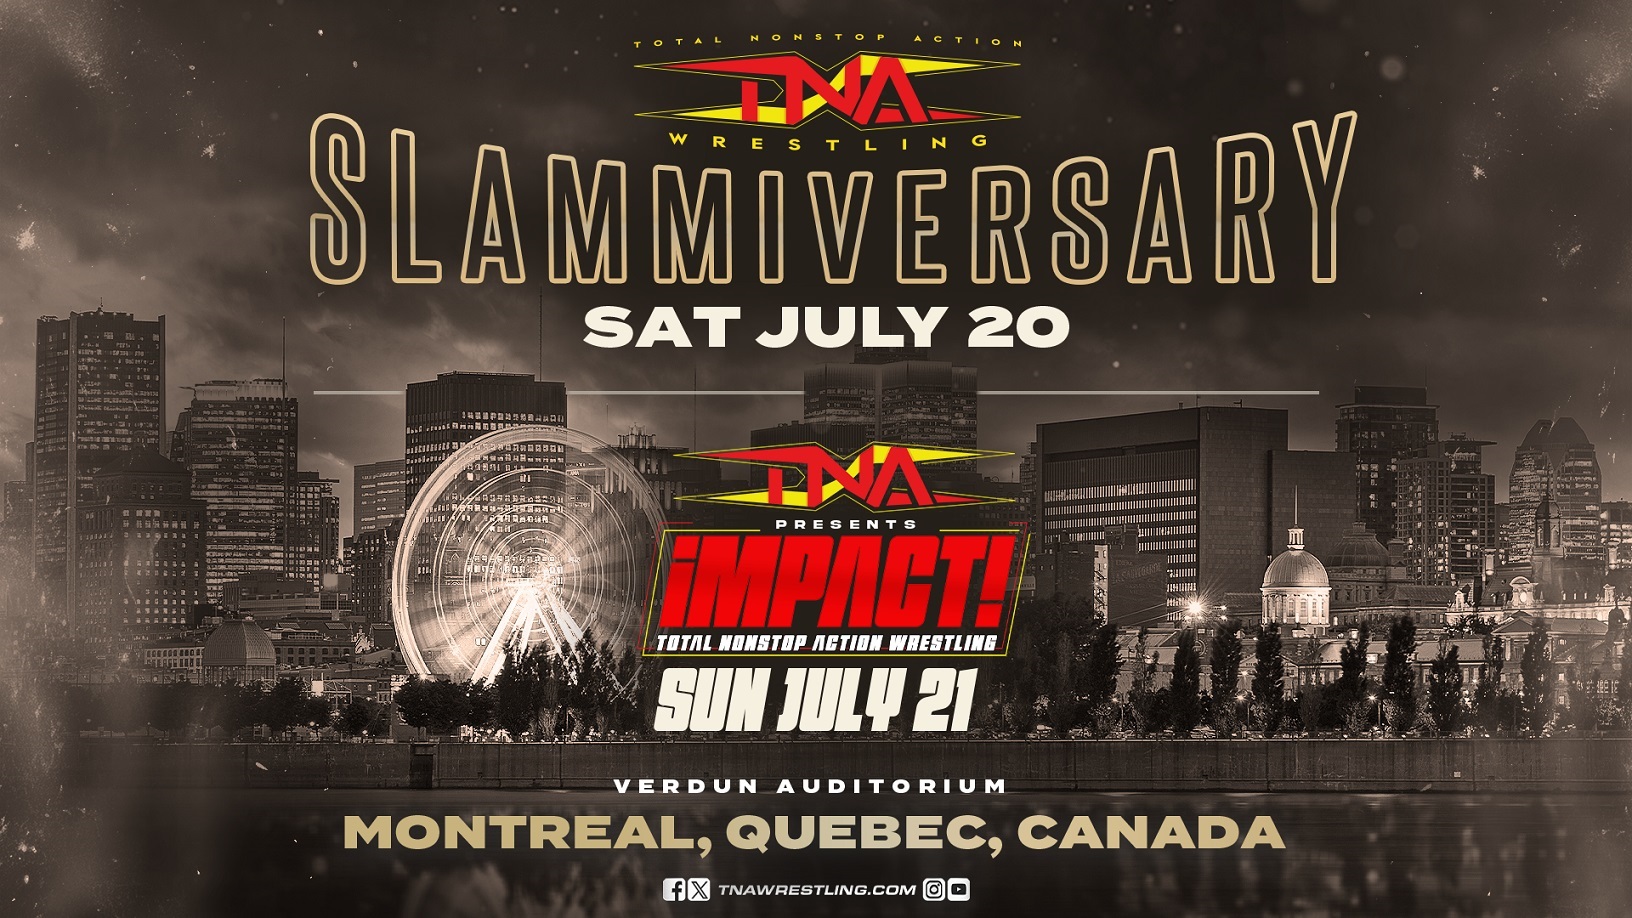 Slammiversary & TNA iMPACT! Come to Montreal, Quebec This July – TNA Wrestling